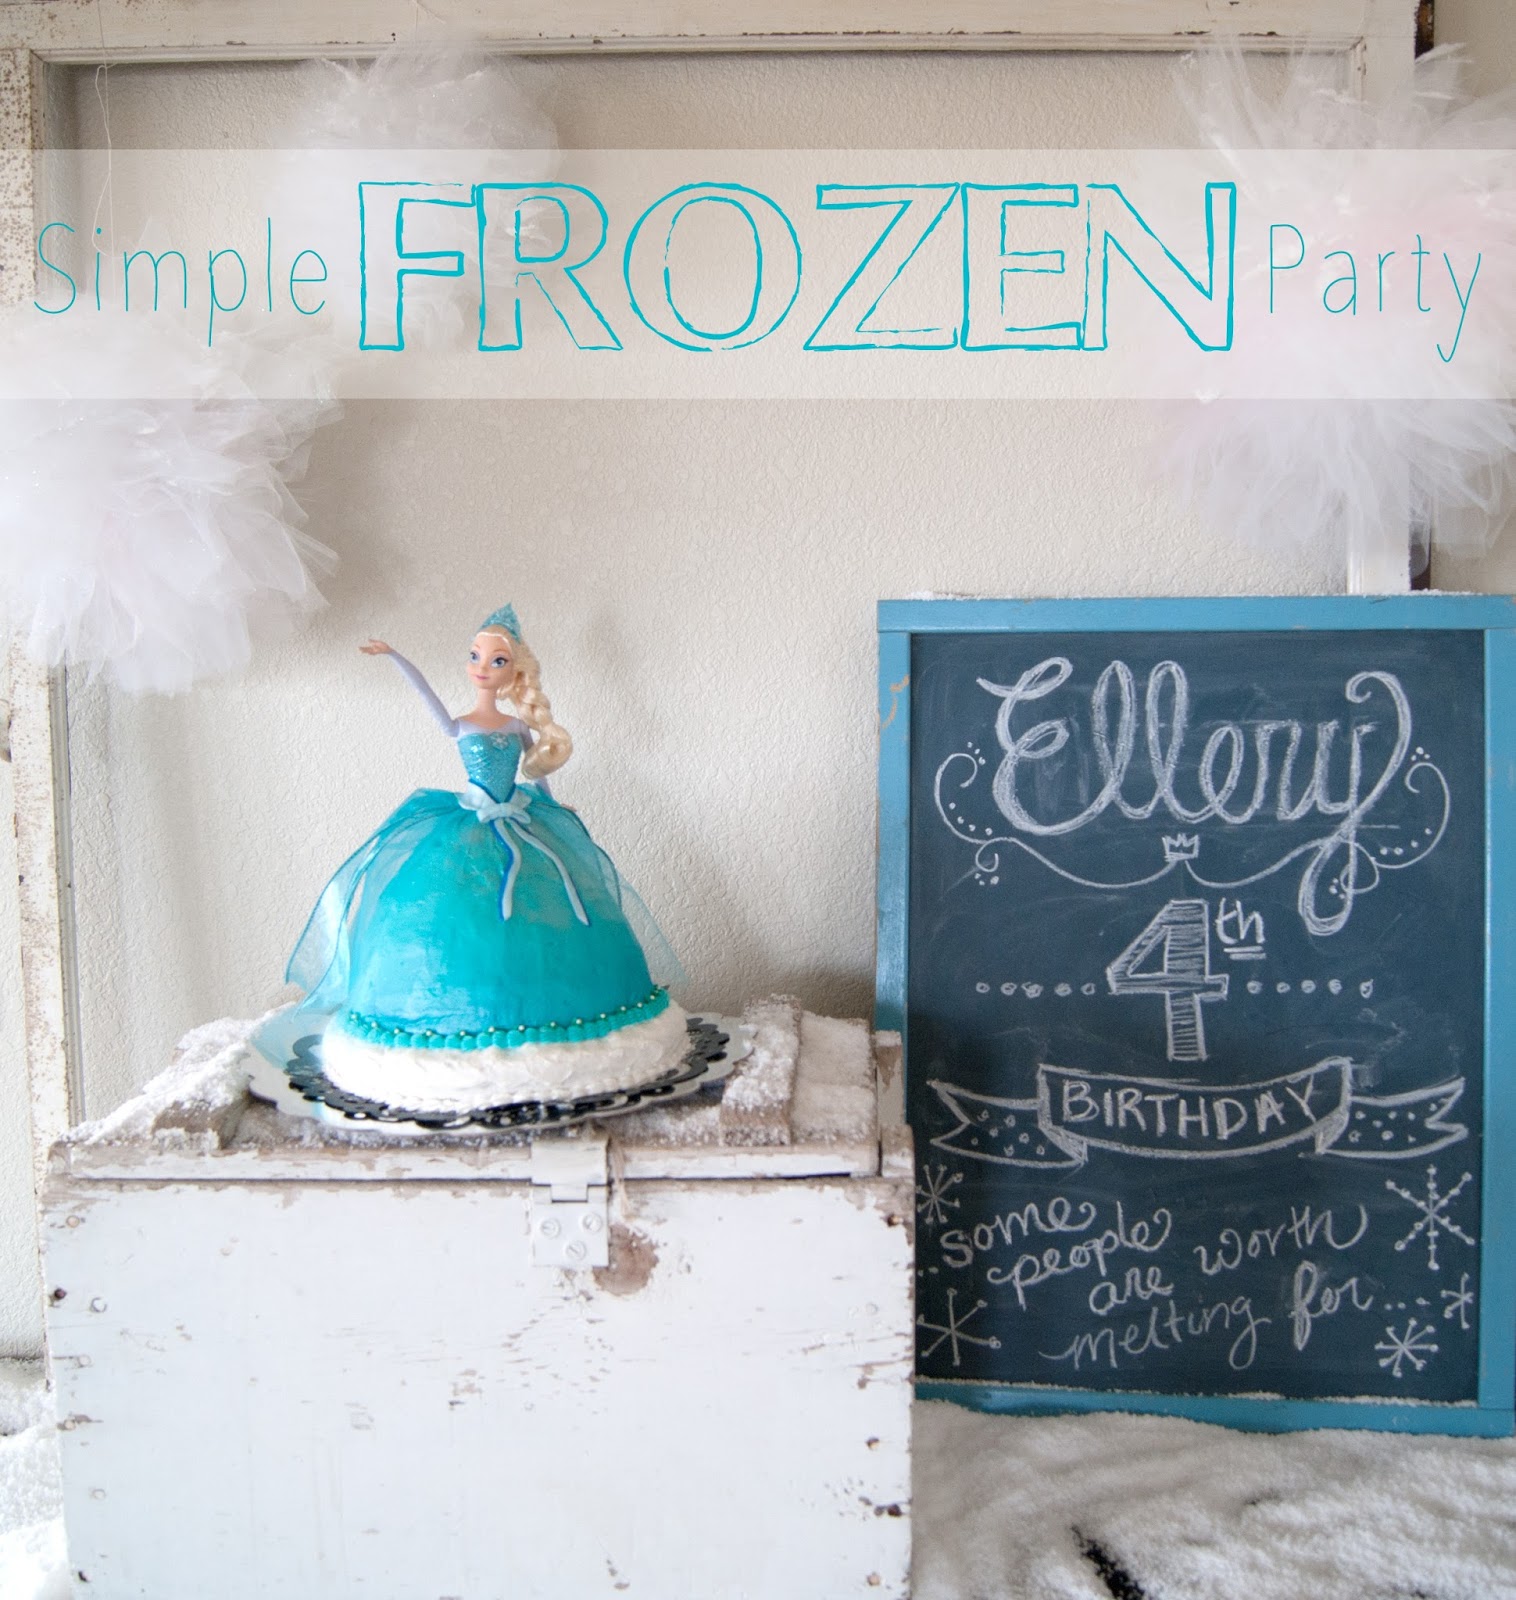 Simple FROZEN Party - birthday party on a budget - 